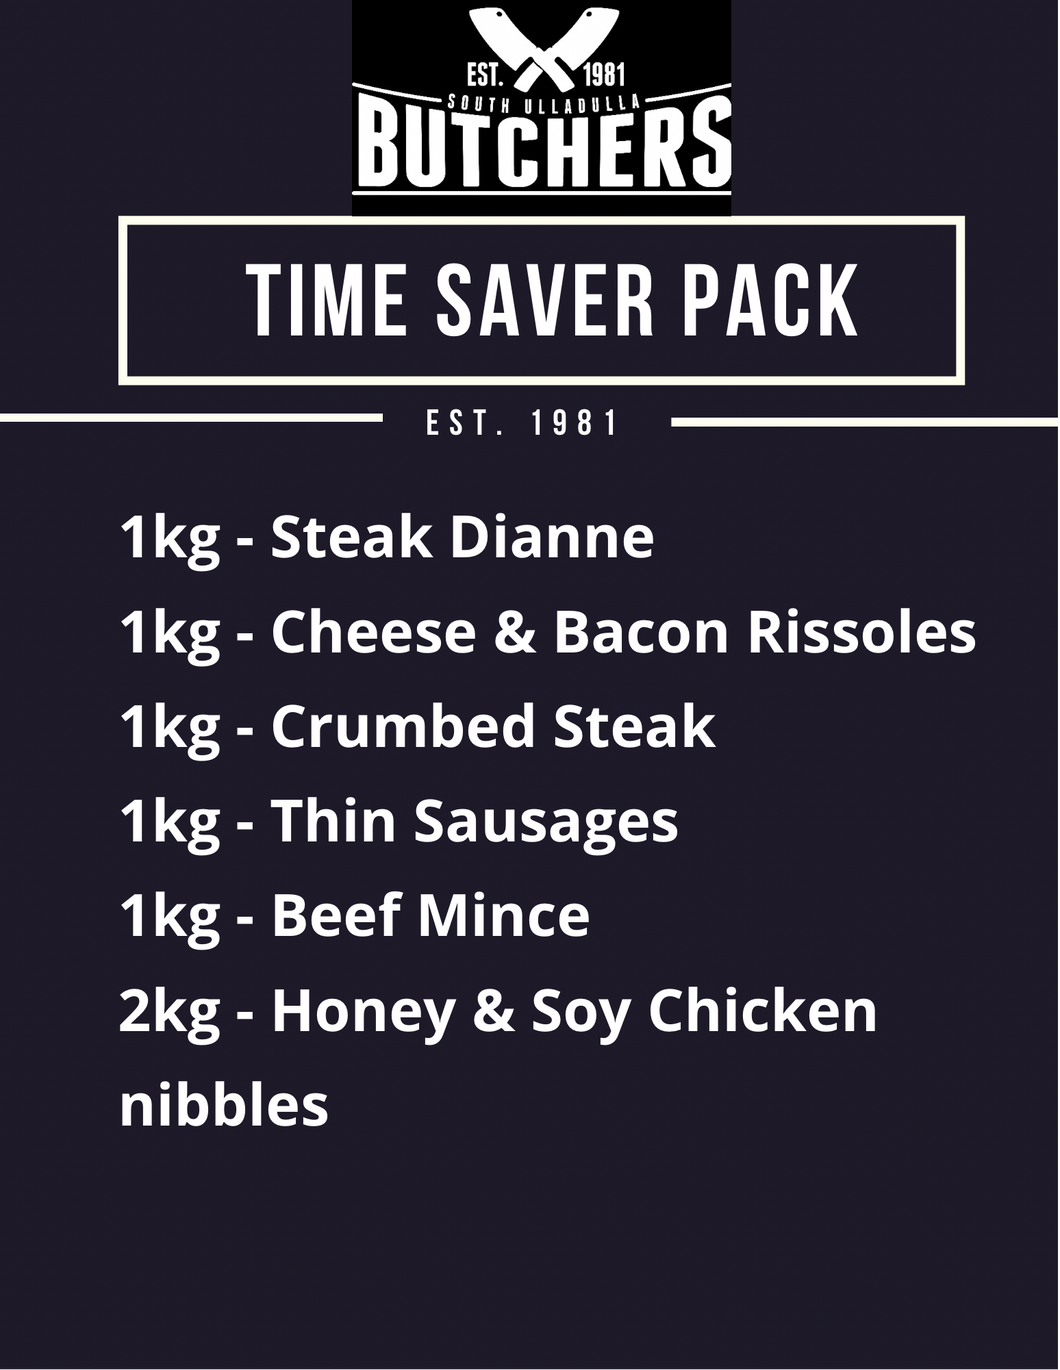 Time Saver Pack